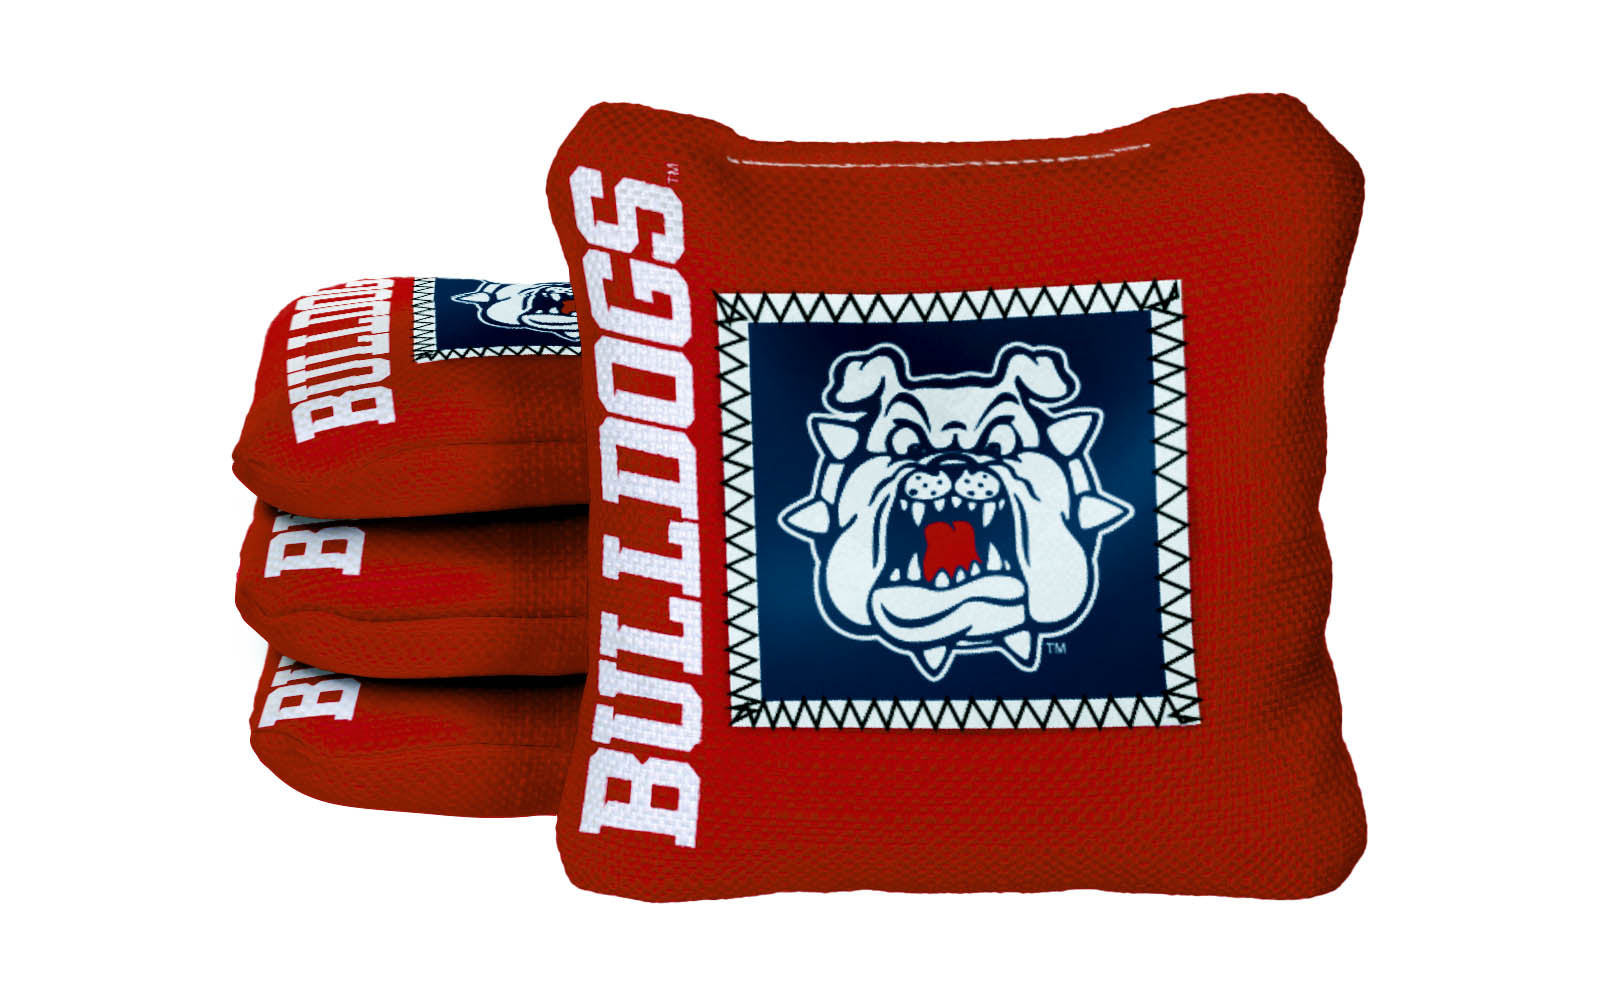 Officially Licensed Collegiate Cornhole Bags - AllCornhole Game Changers Steady 2.0 - Set of 4 -Fresno State